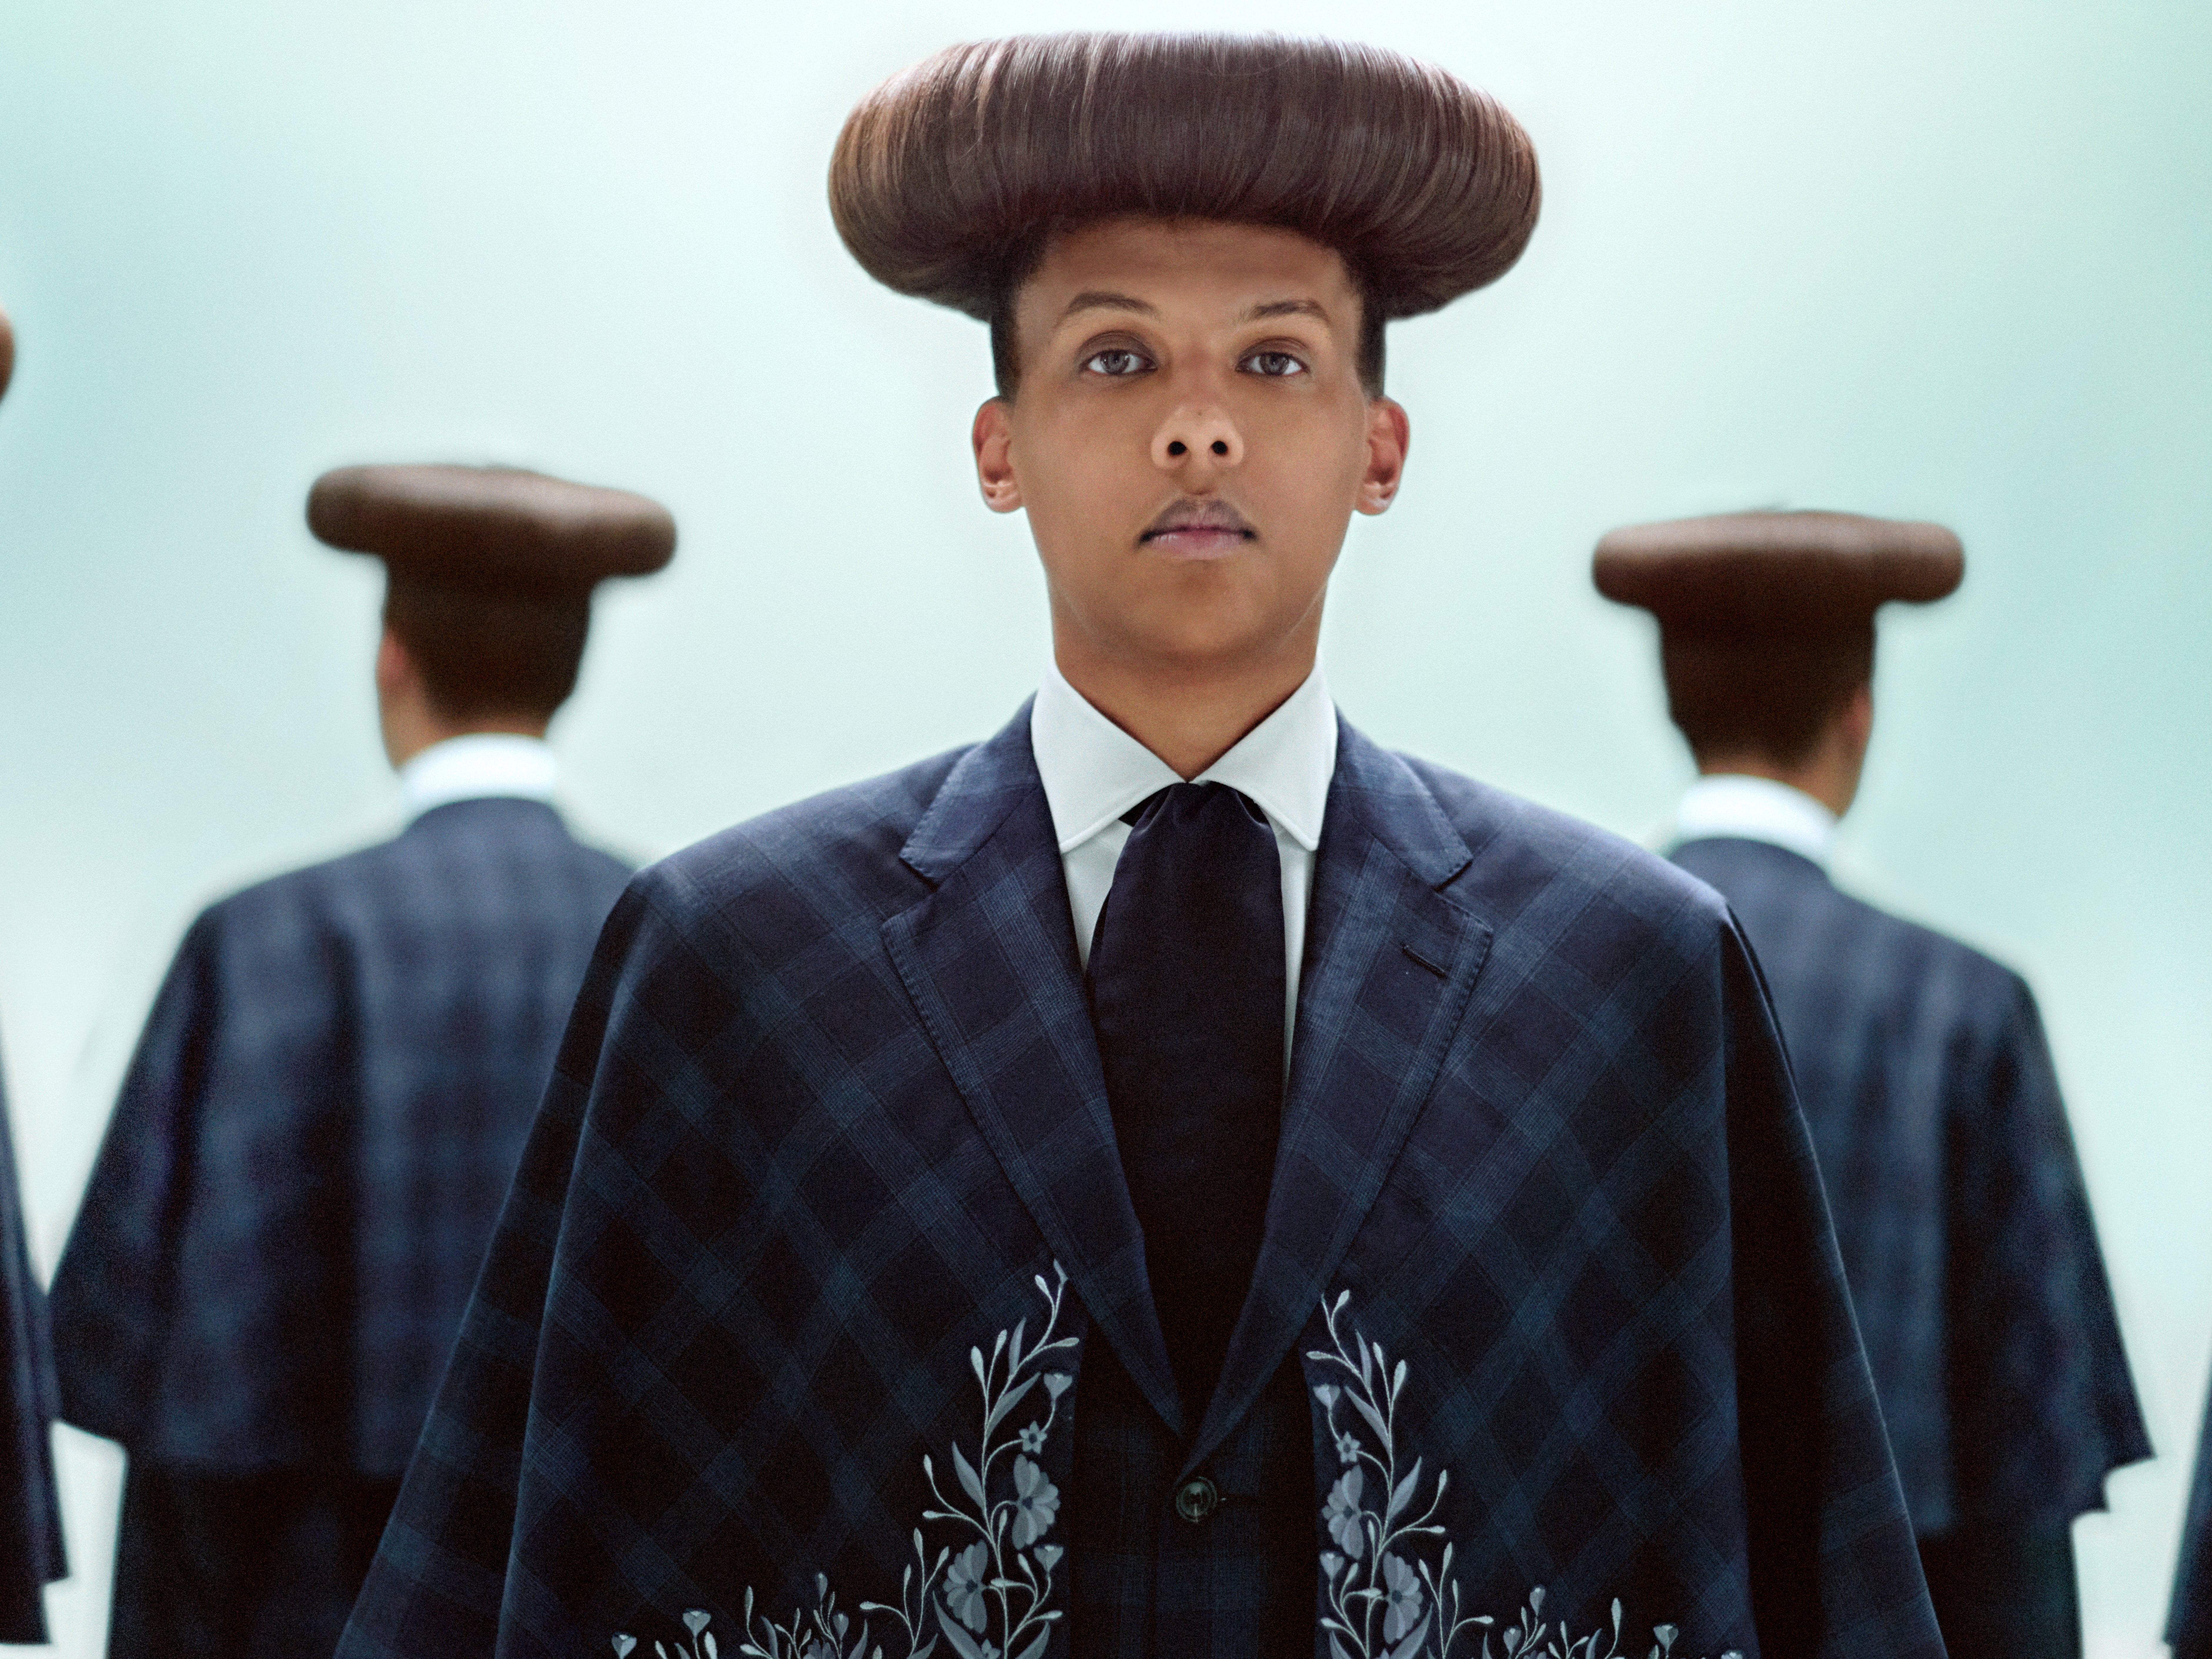 Stromae No one told me I was a one-hit wonder pic